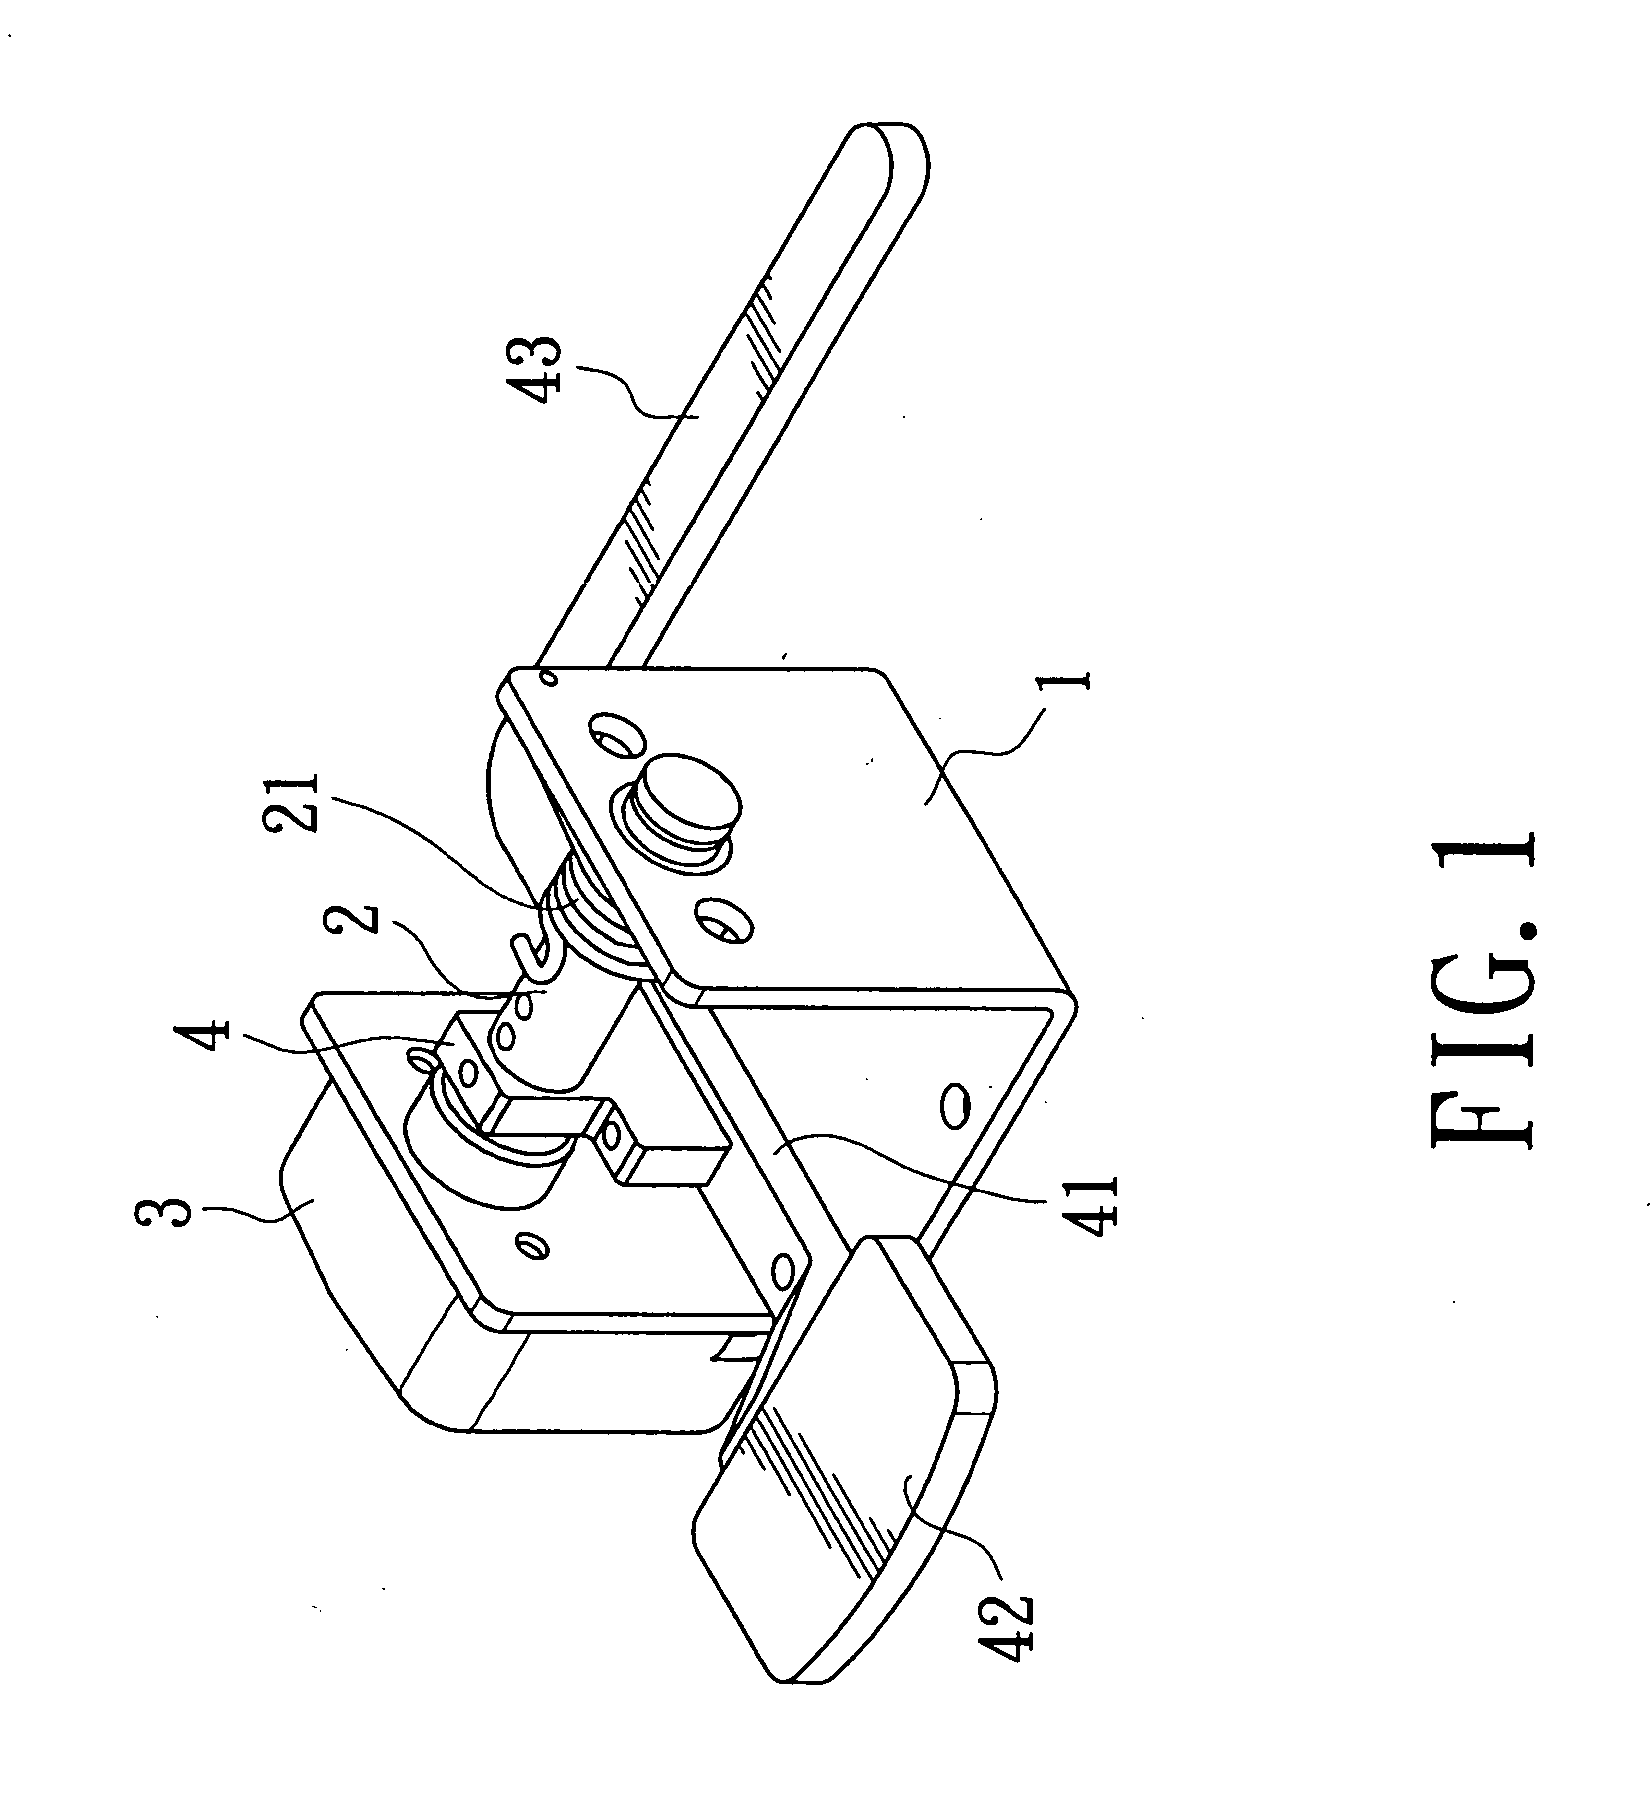 Mobility pedal structure for electric scooter